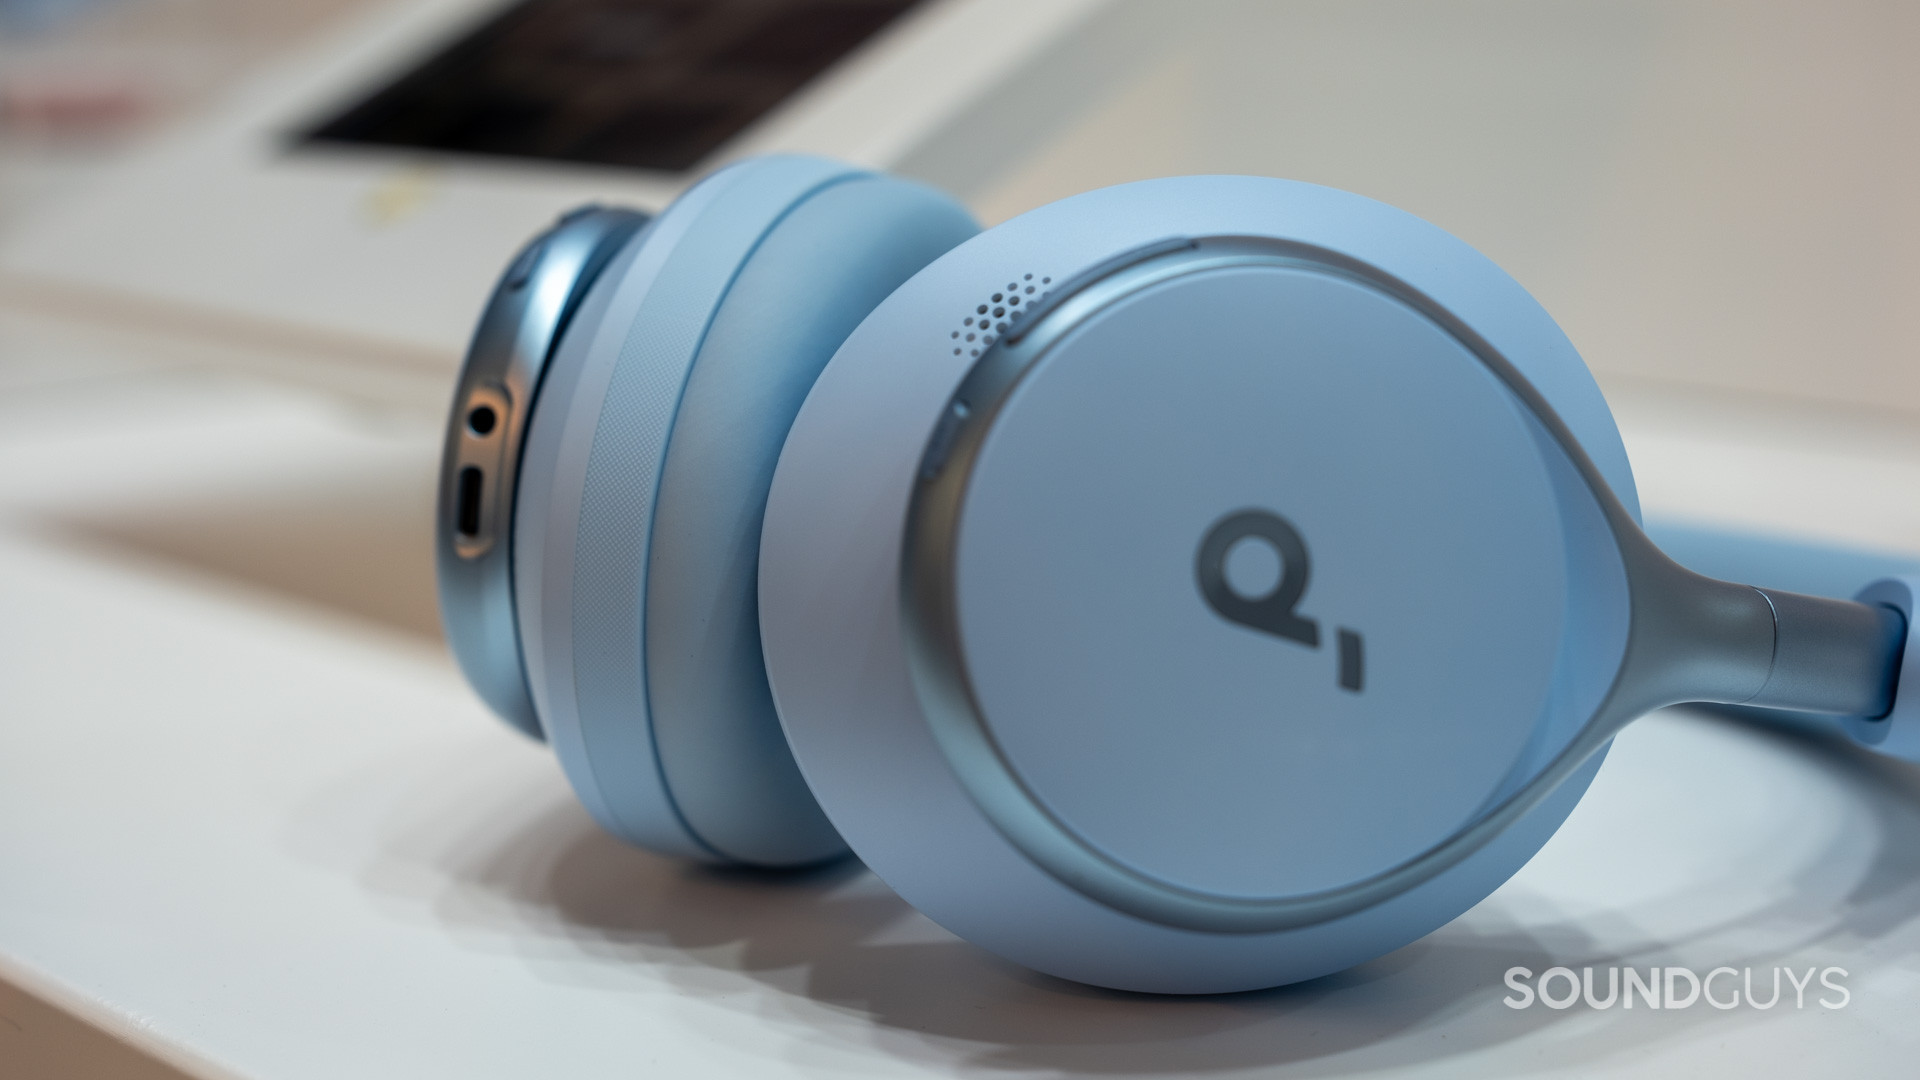 soundcore Space One, Upgraded Noise Cancelling Headphones - soundcore US